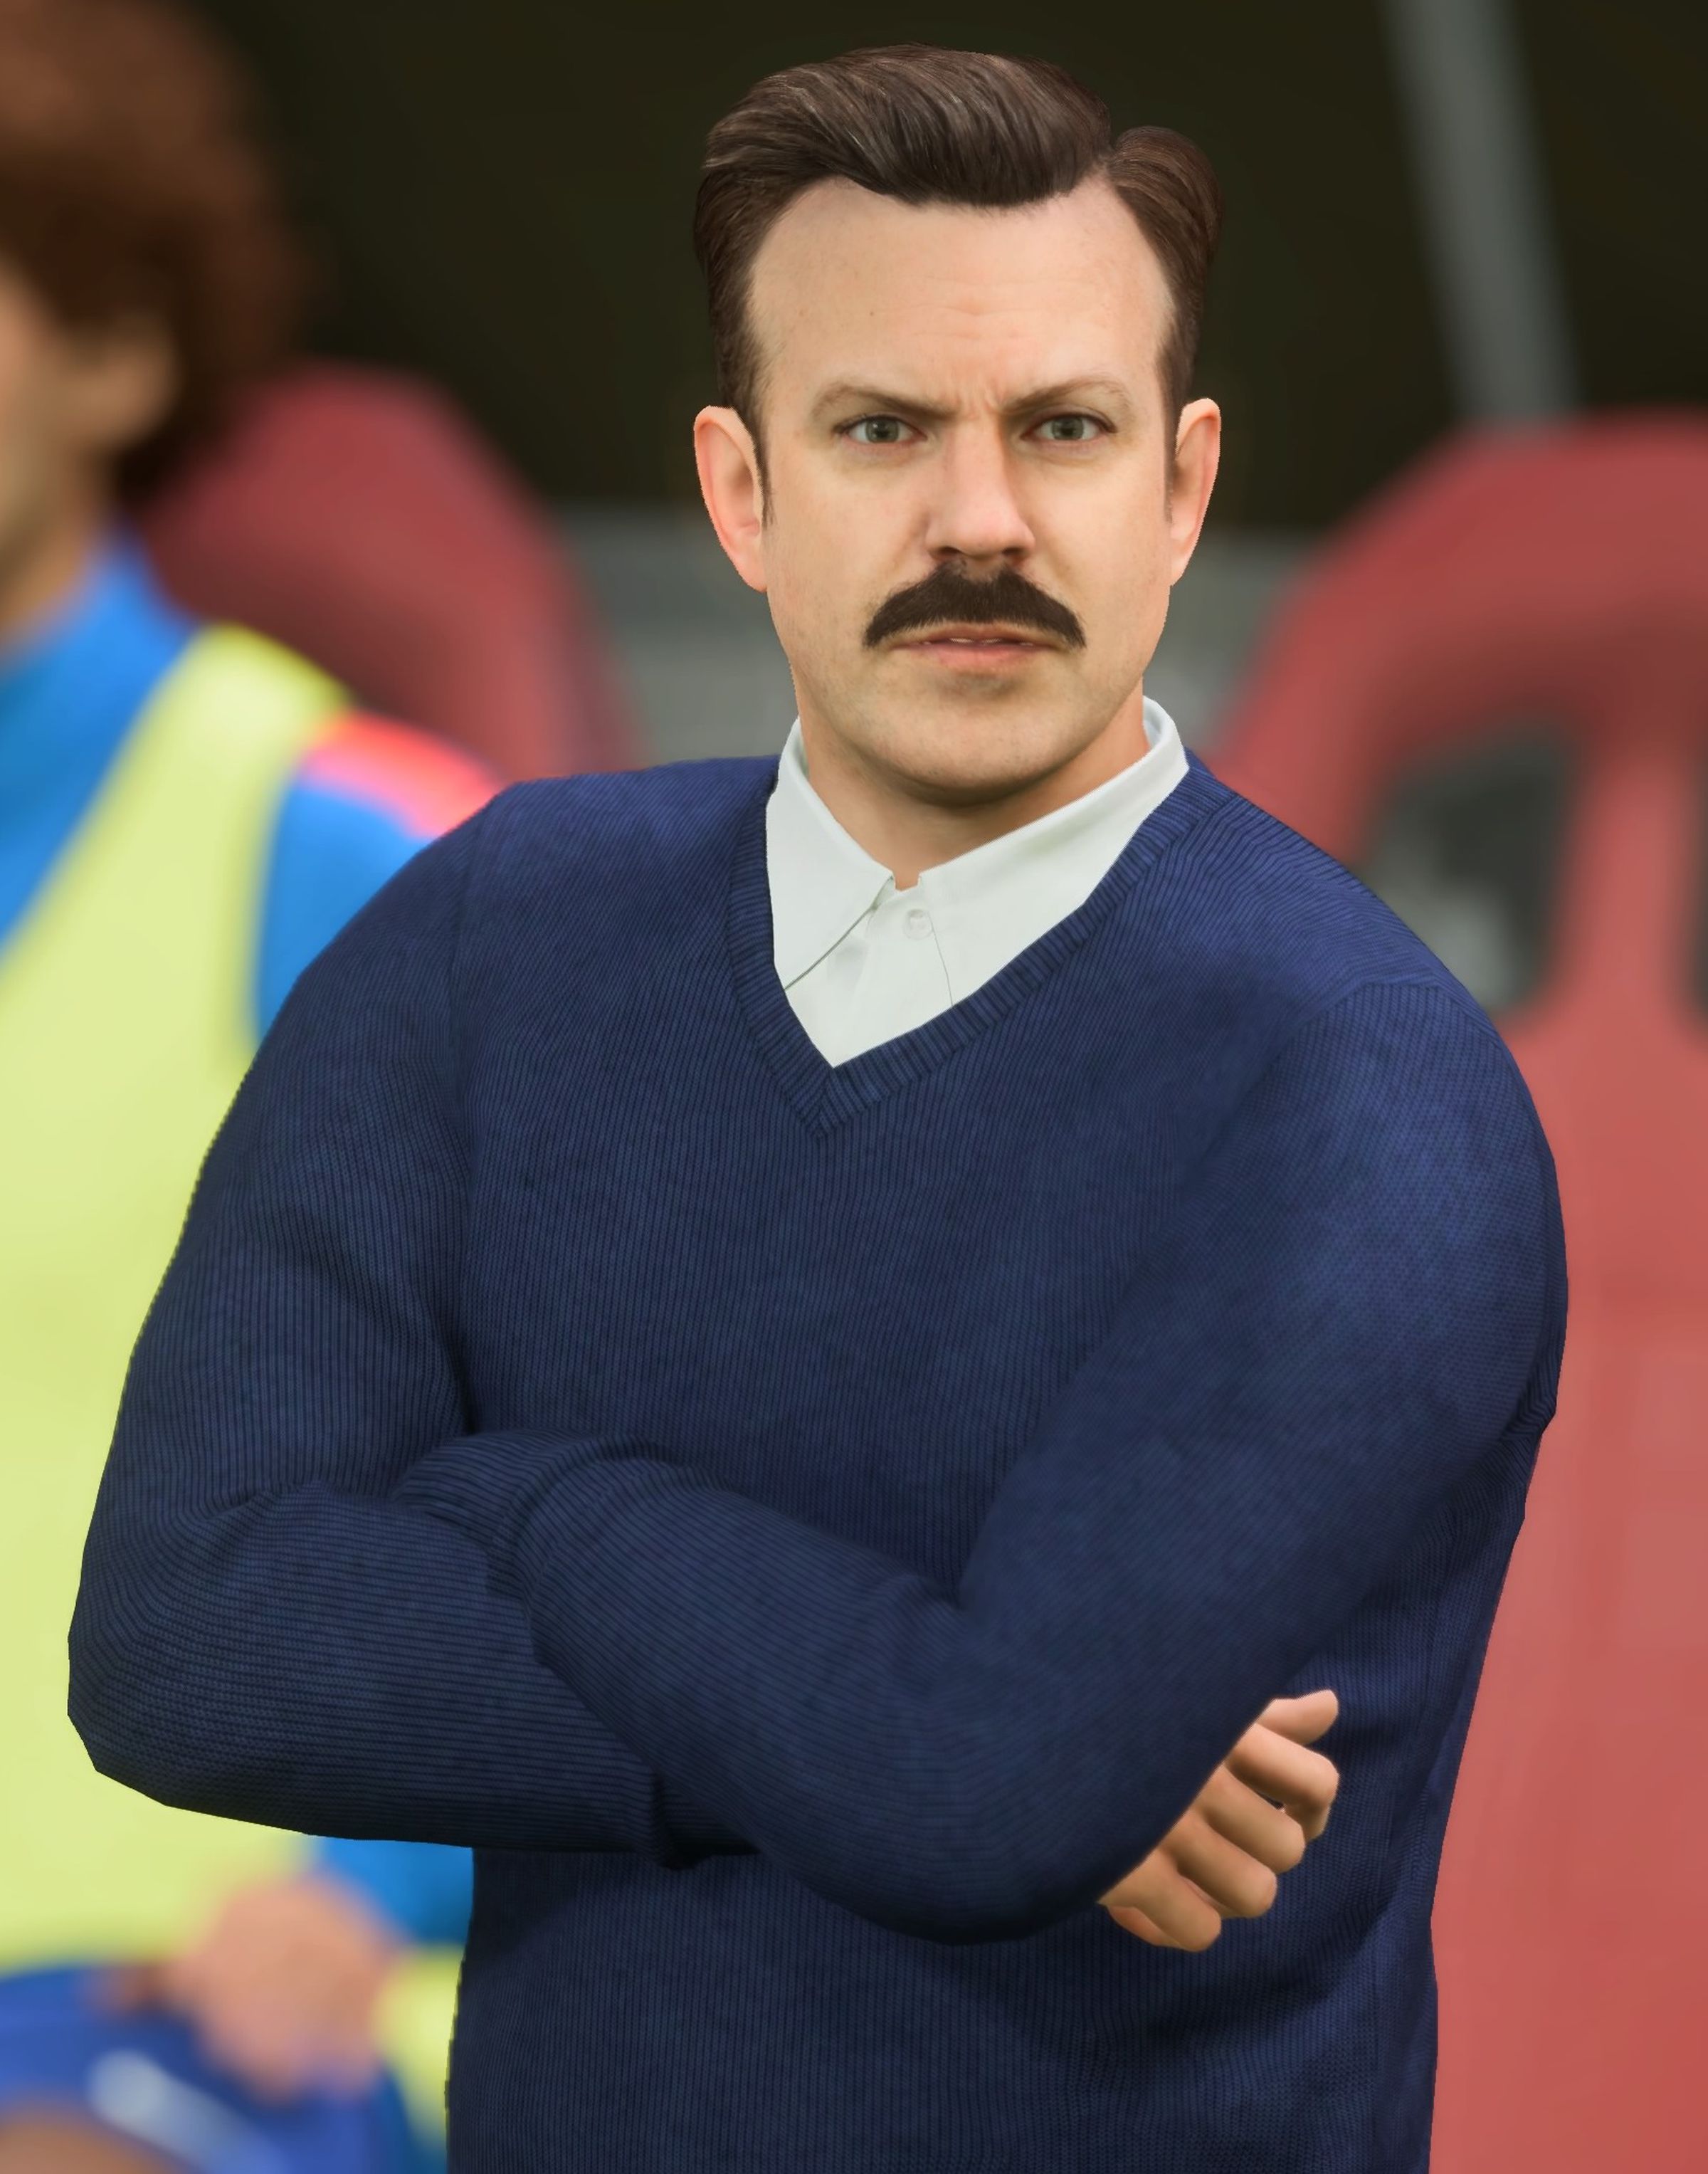 A screenshot of Ted Lasso in FIFA 23.